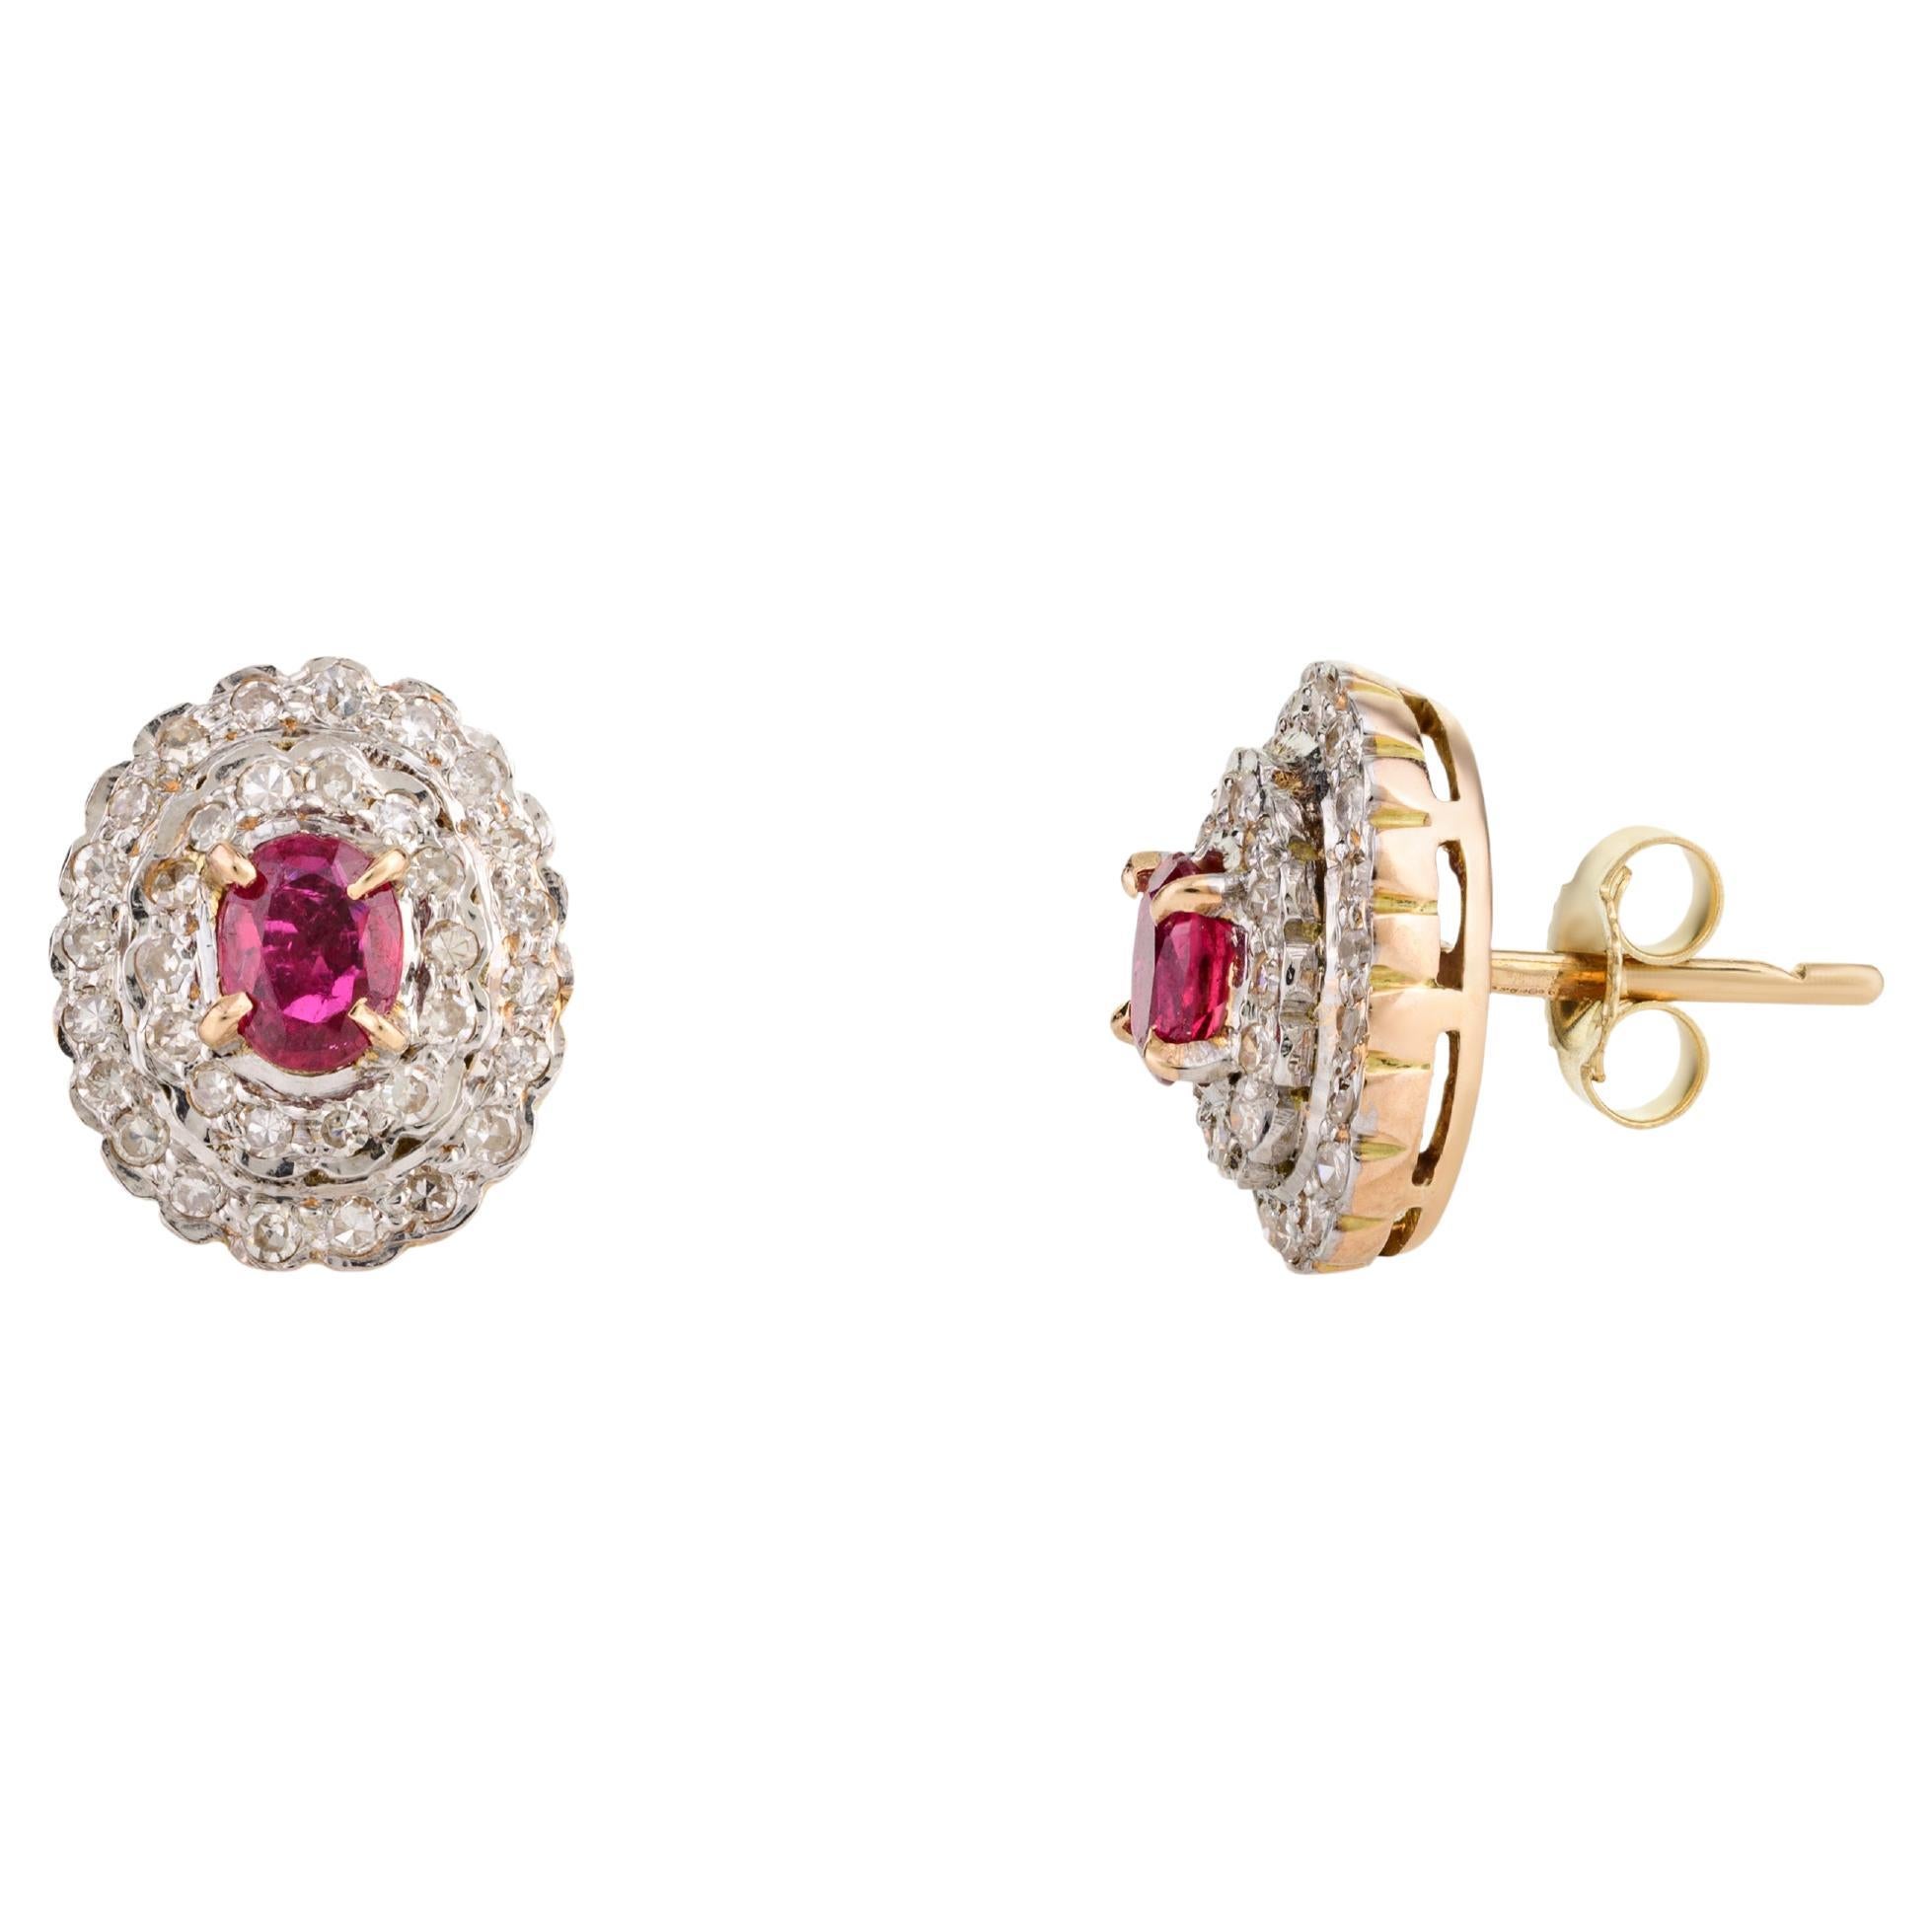 Certified Genuine Ruby and Halo Diamond Wedding Stud Earrings in 14k Yellow Gold For Sale